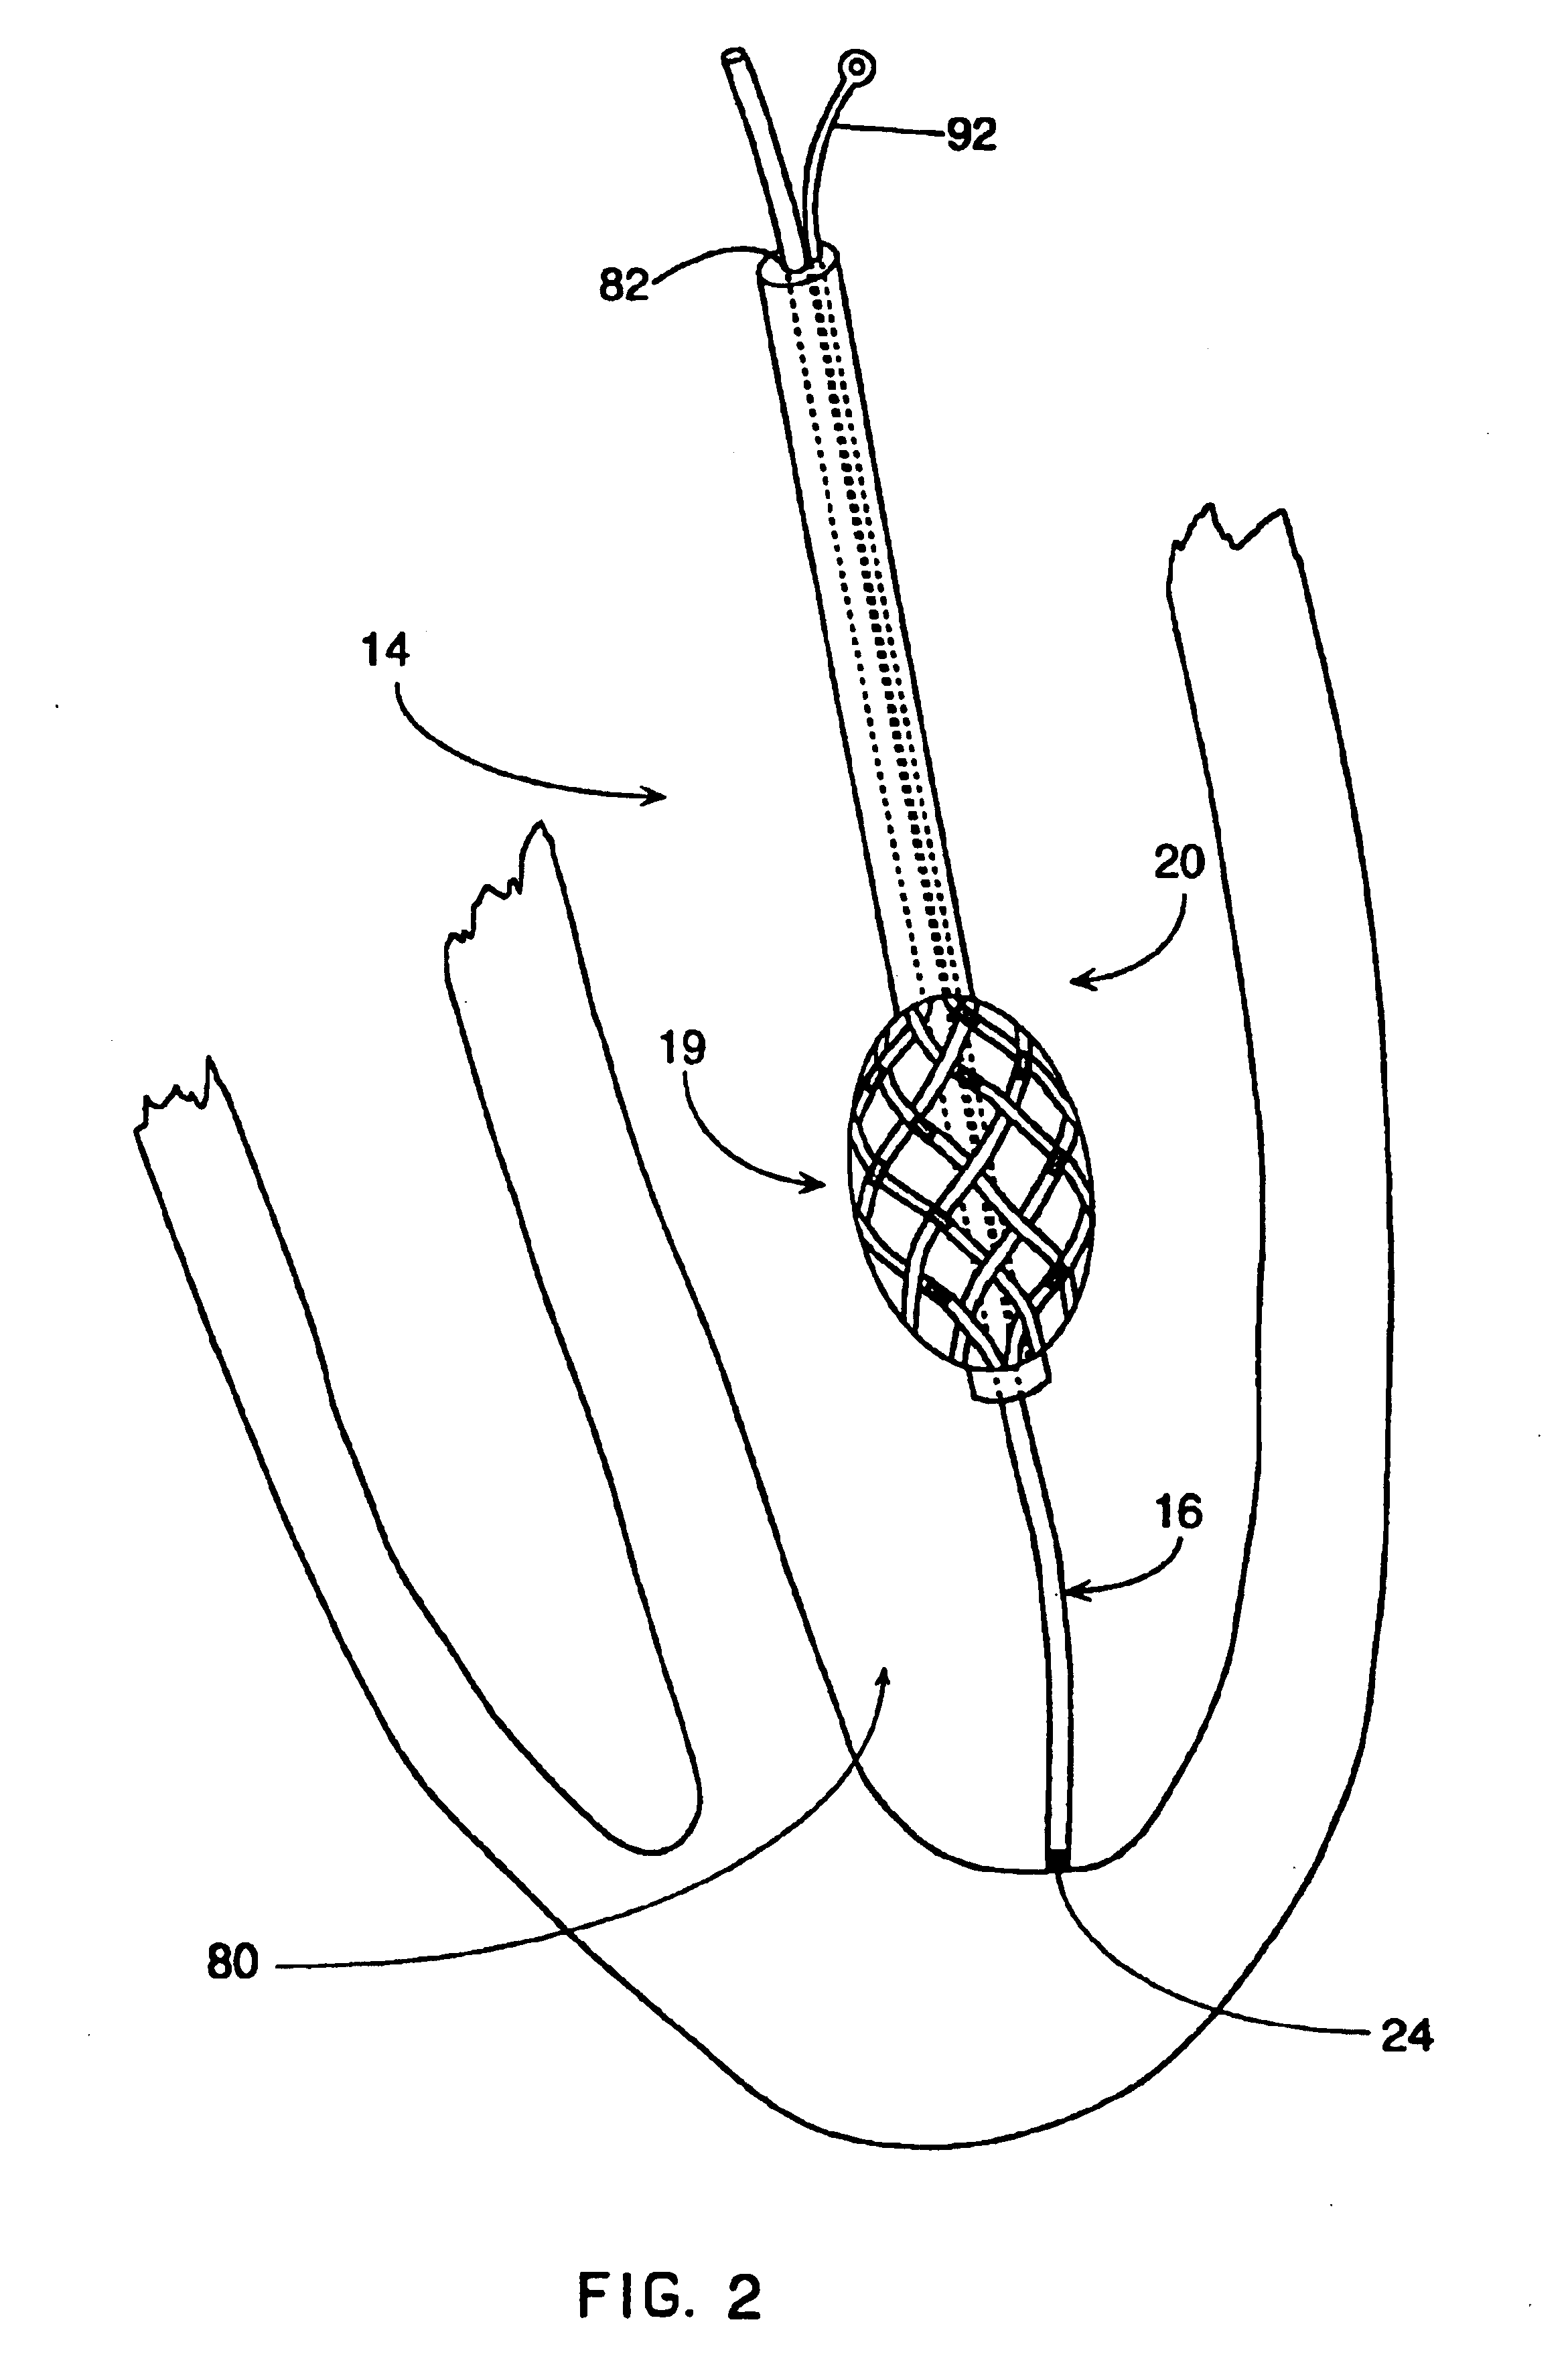 Method of mapping a plug in a mapping catheter